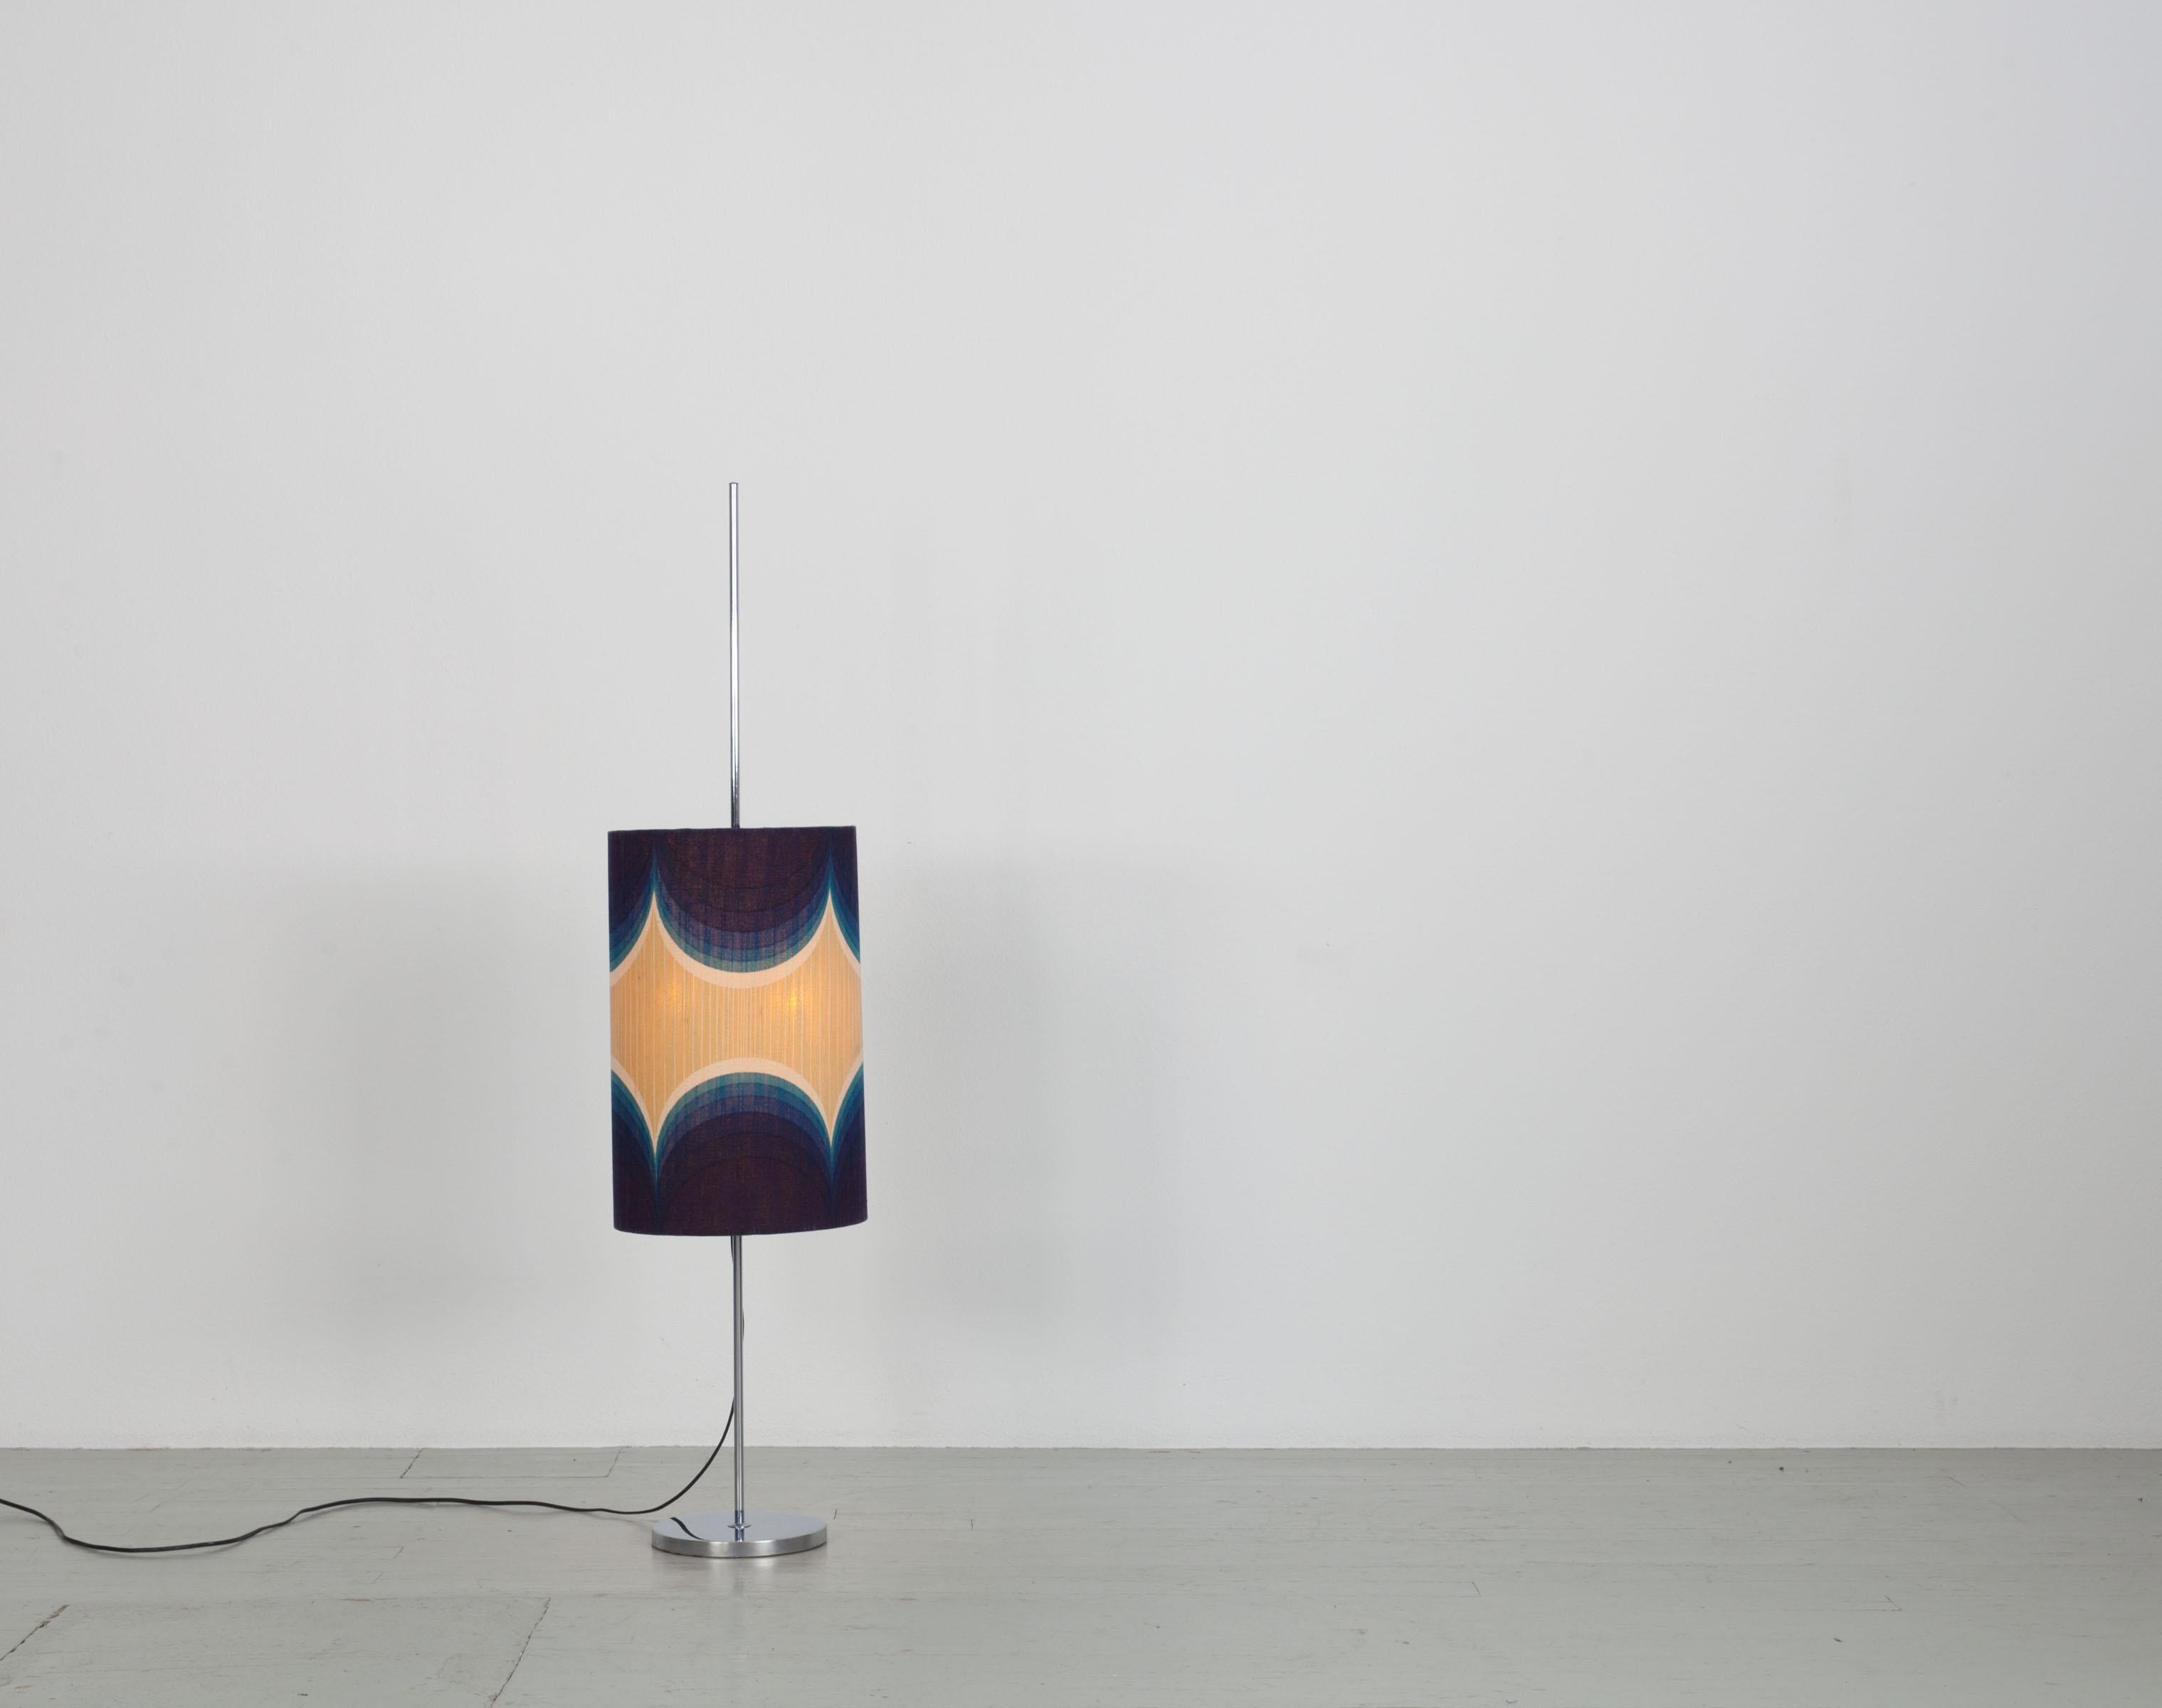 German floor lamp from the 70s. The lamp has an original, height-adjustable lampshade, in the typical 70s pattern. The lamp base is made of chrome. The lamp has two E27 sockets. It has a height of 60cm and the diameter of the lampshade is 33cm.